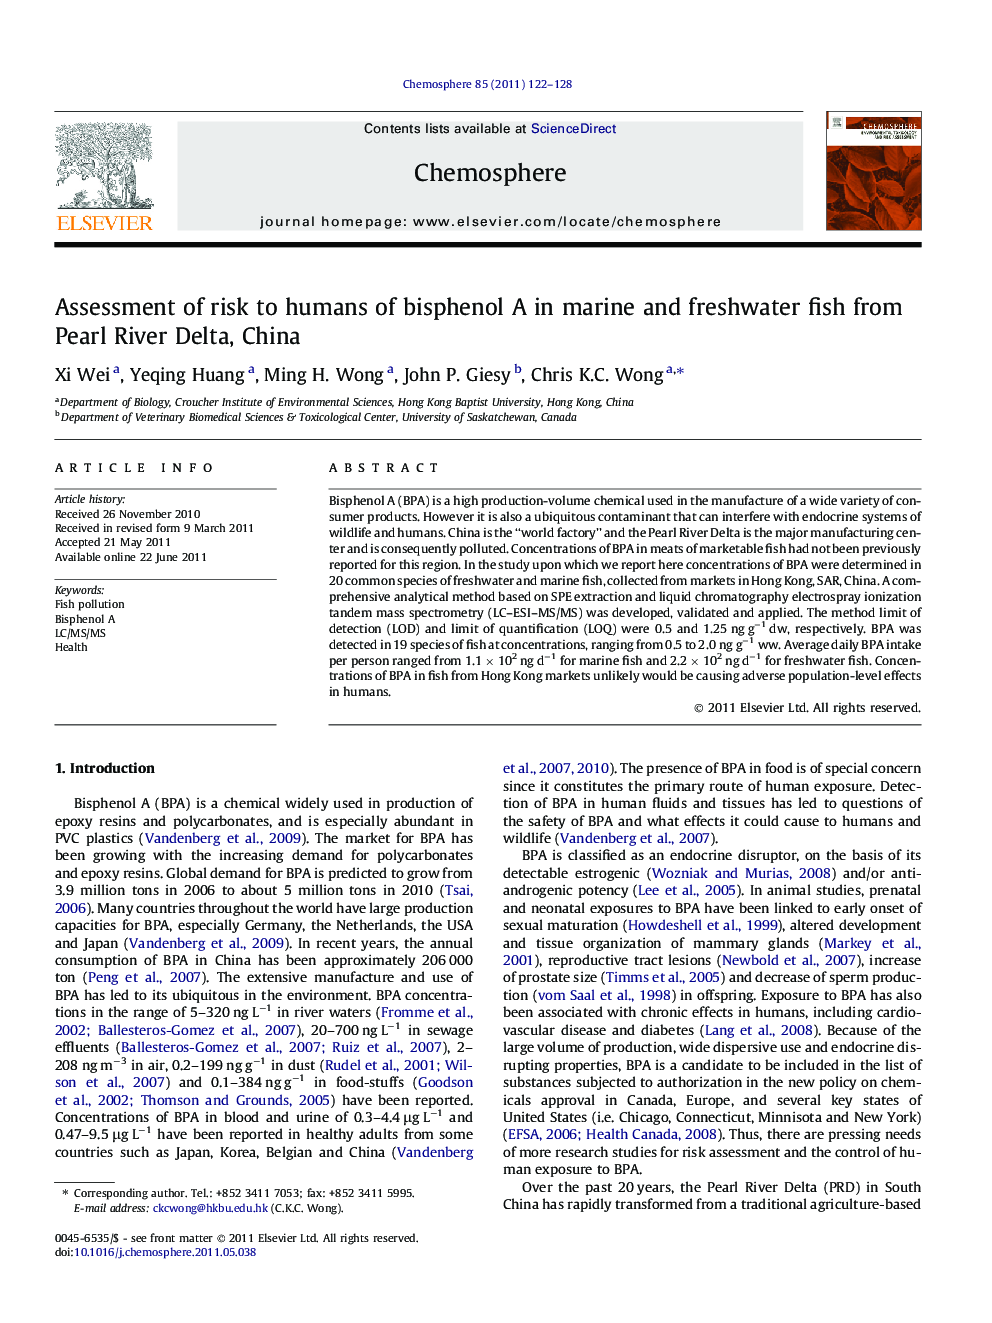 Assessment of risk to humans of bisphenol A in marine and freshwater fish from Pearl River Delta, China